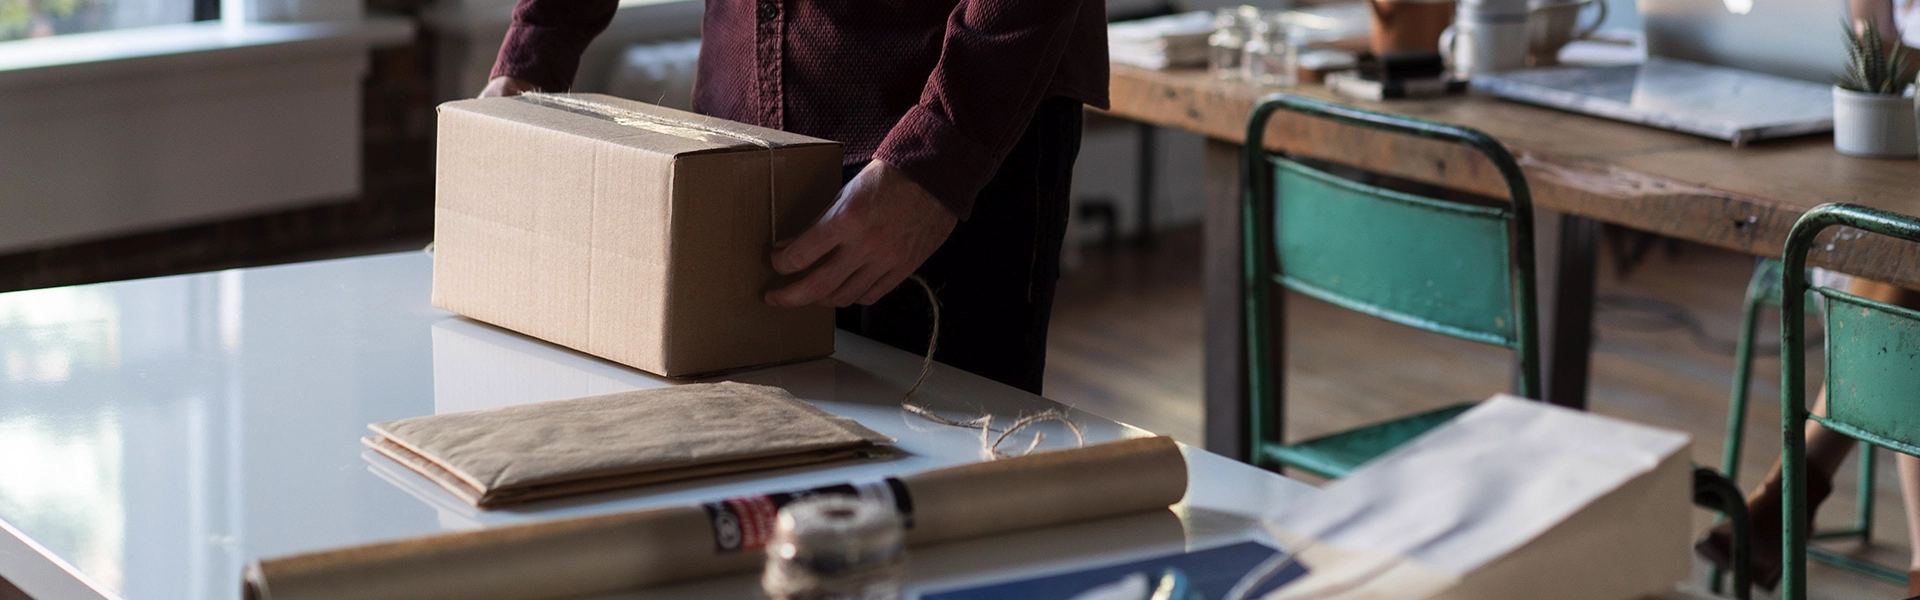 Small Business eCommerce packing an order